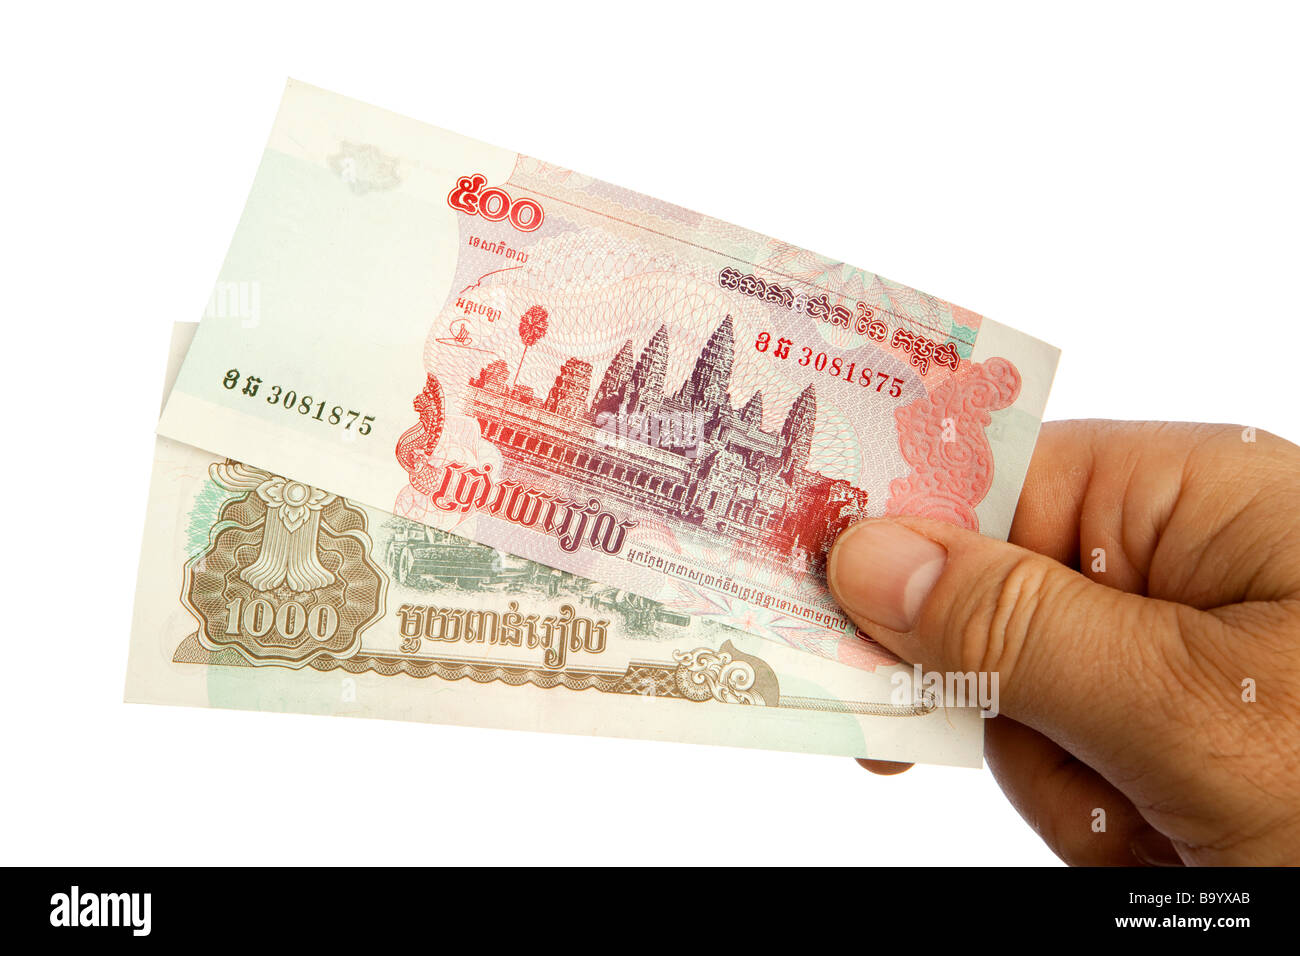 Money male hand holding handful of Cambodian currency Stock Photo